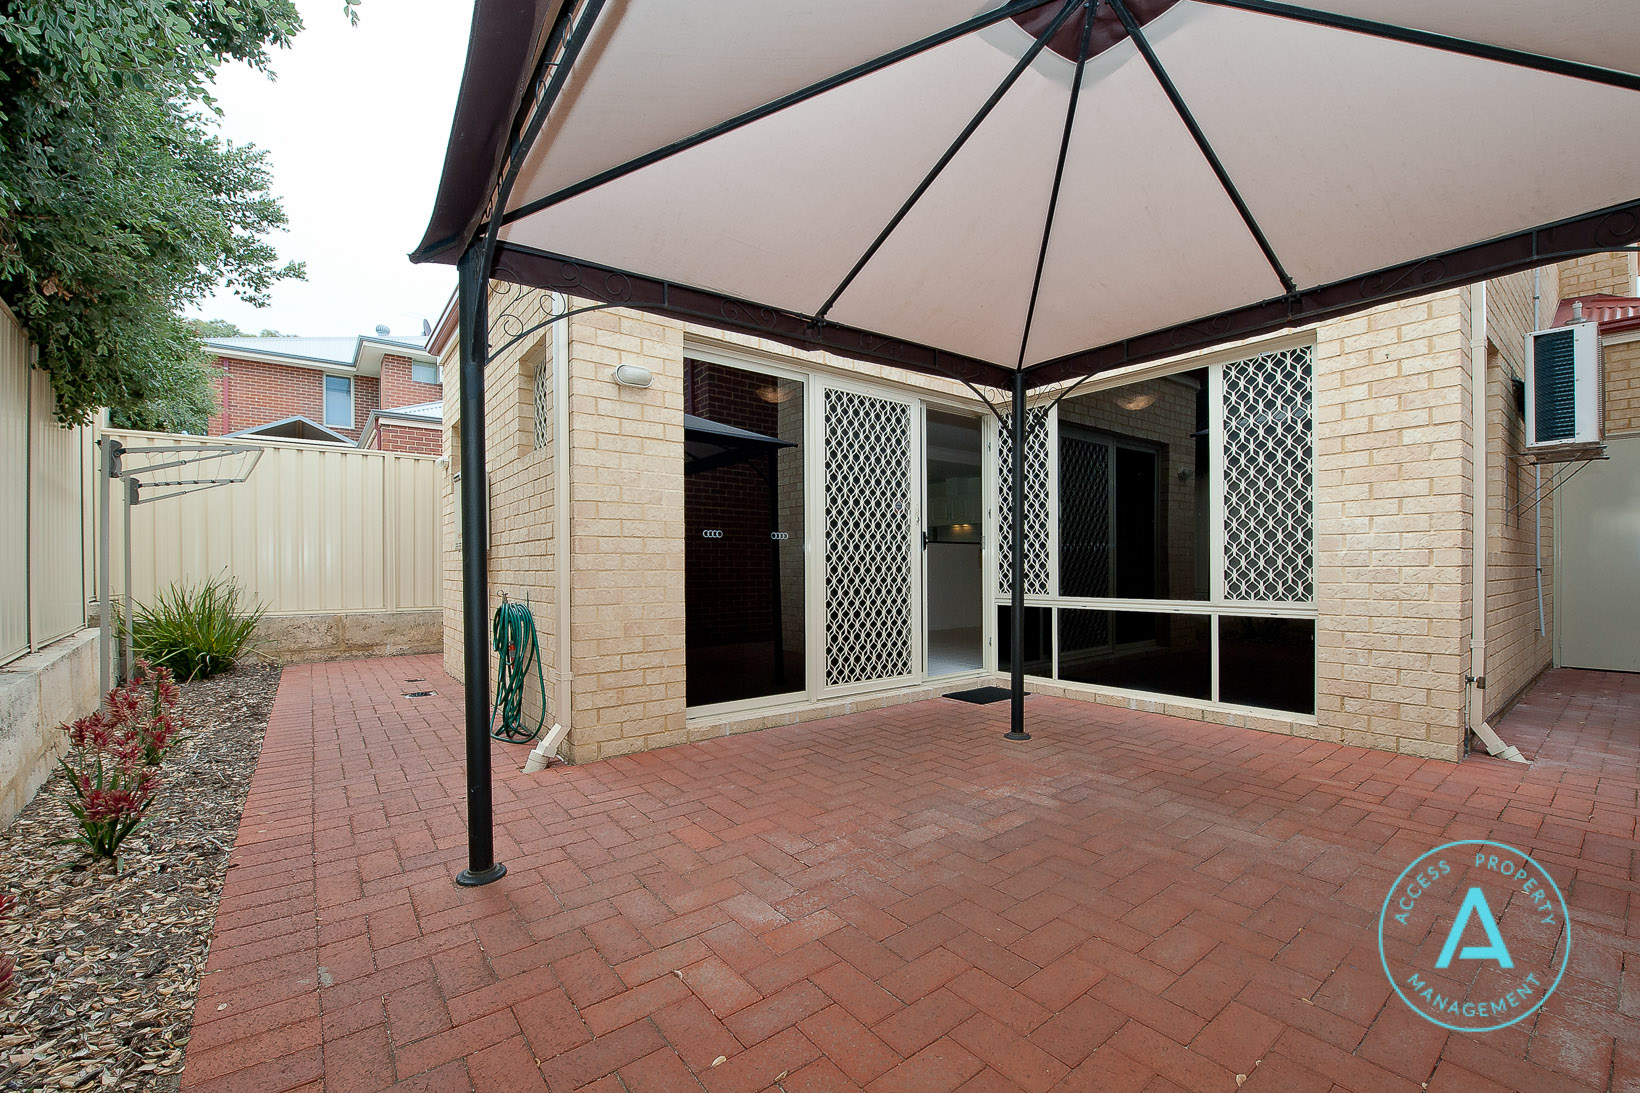 Access Property Management 7/8 Forster Avenue Outdoor area